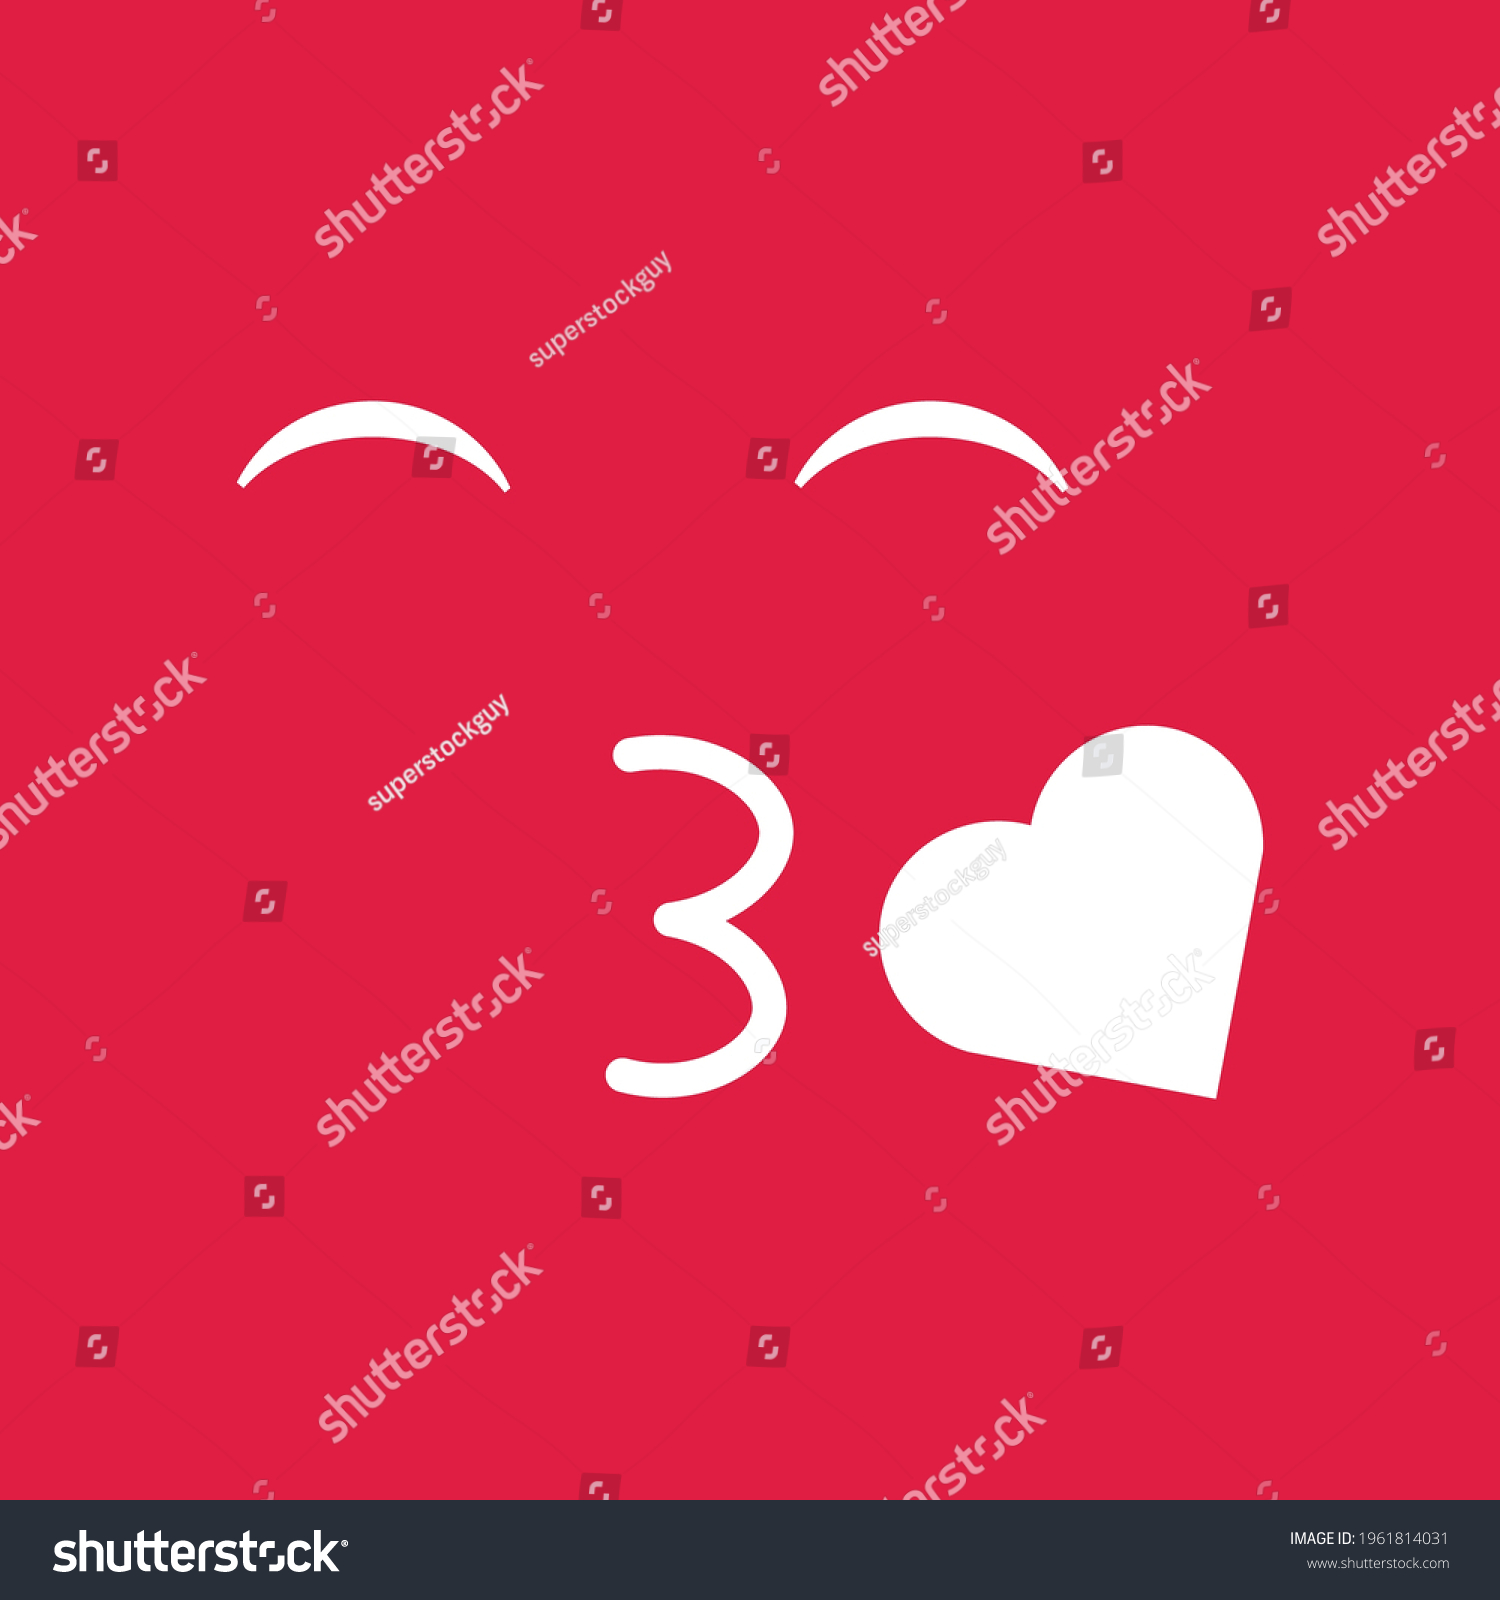 SVG of Cute social media face blowing kisses emoji on a red background. Royalty-free. svg